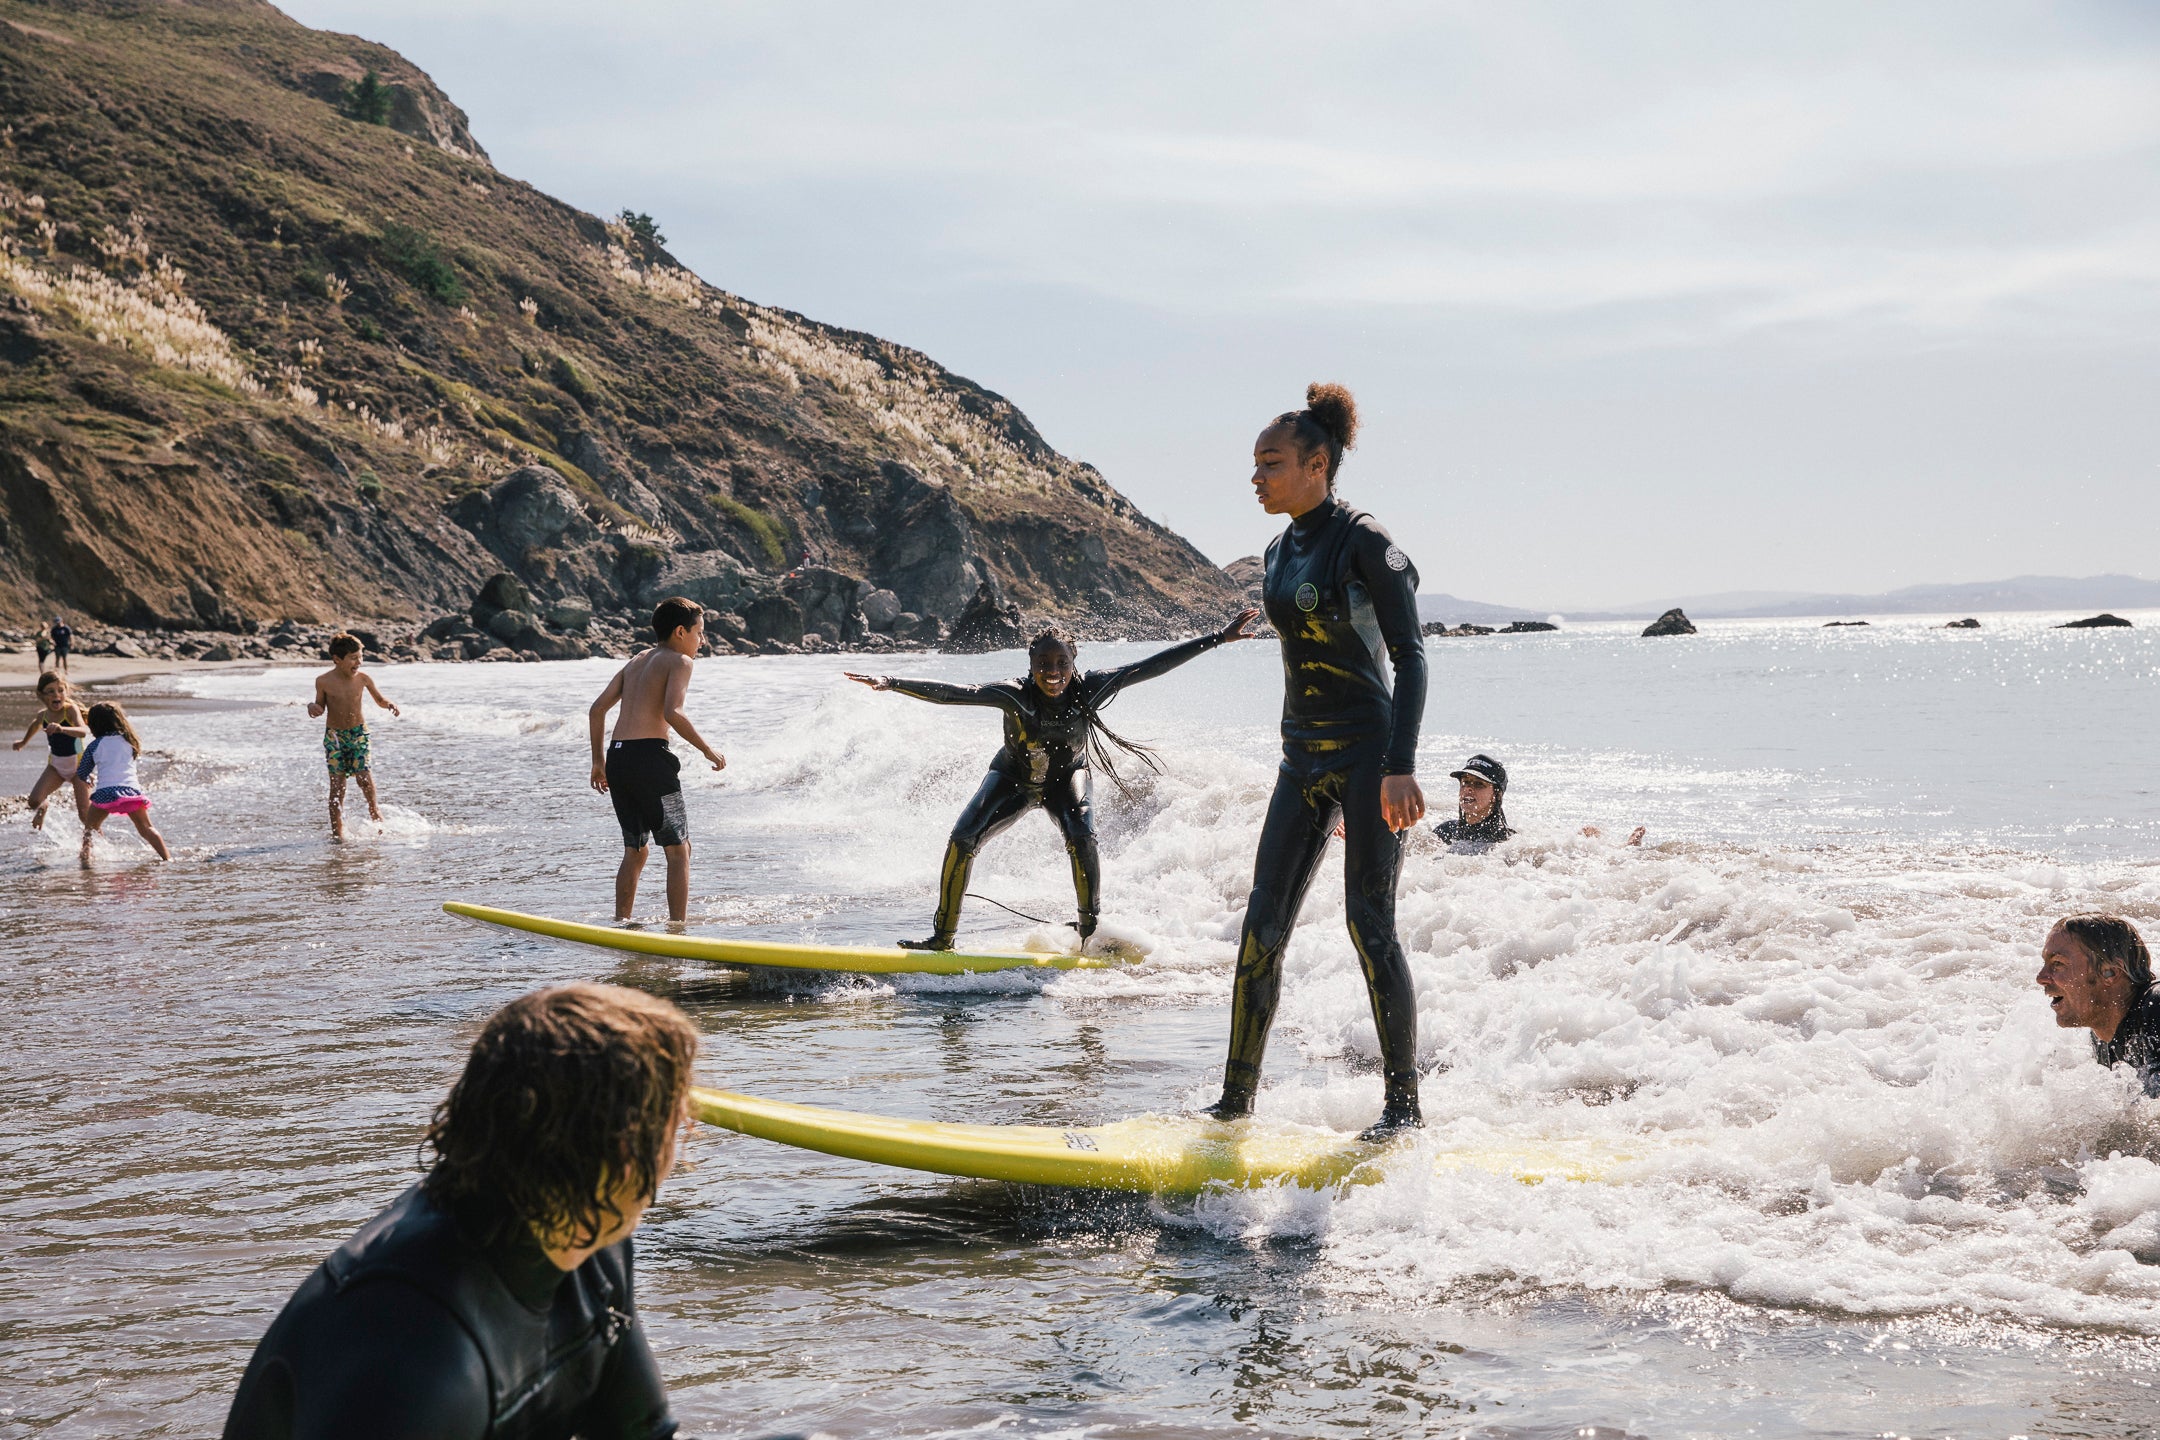 MeWater x TANDM Surf: Empowering Youth through the Power of Mother Nature